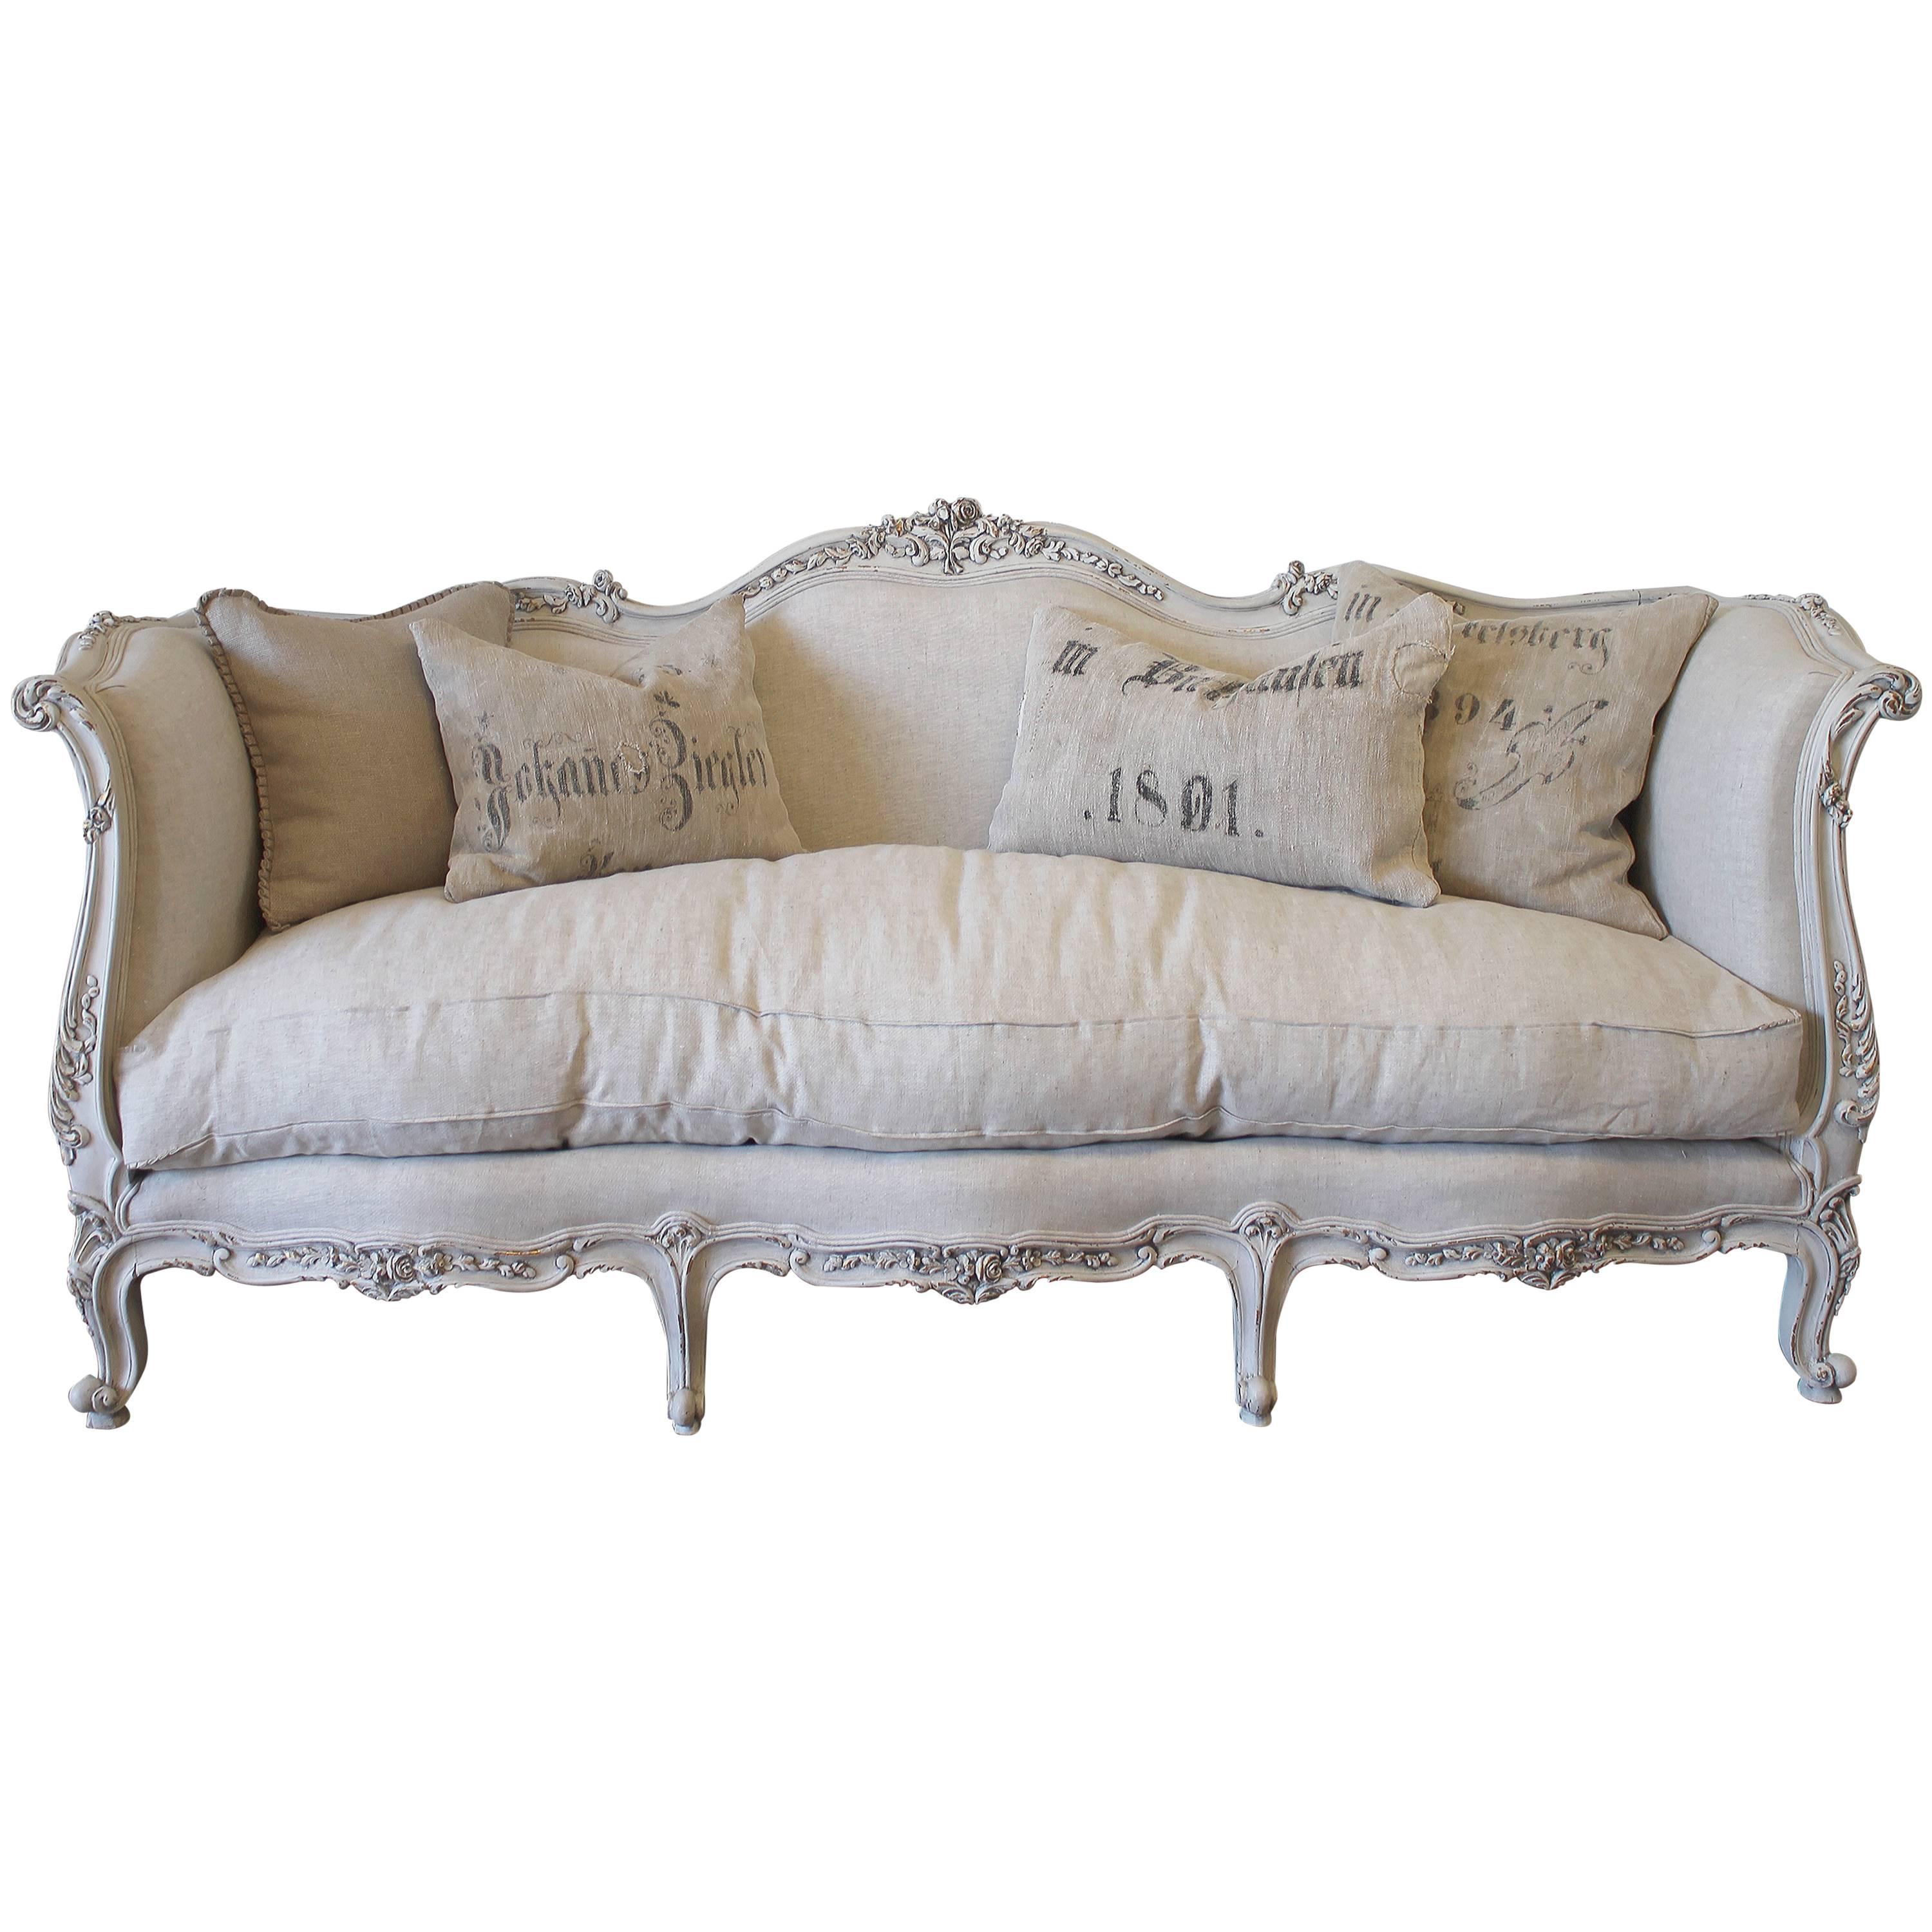 Vintage French Louis XV Style Daybed Sofa in Natural Beligan Linen